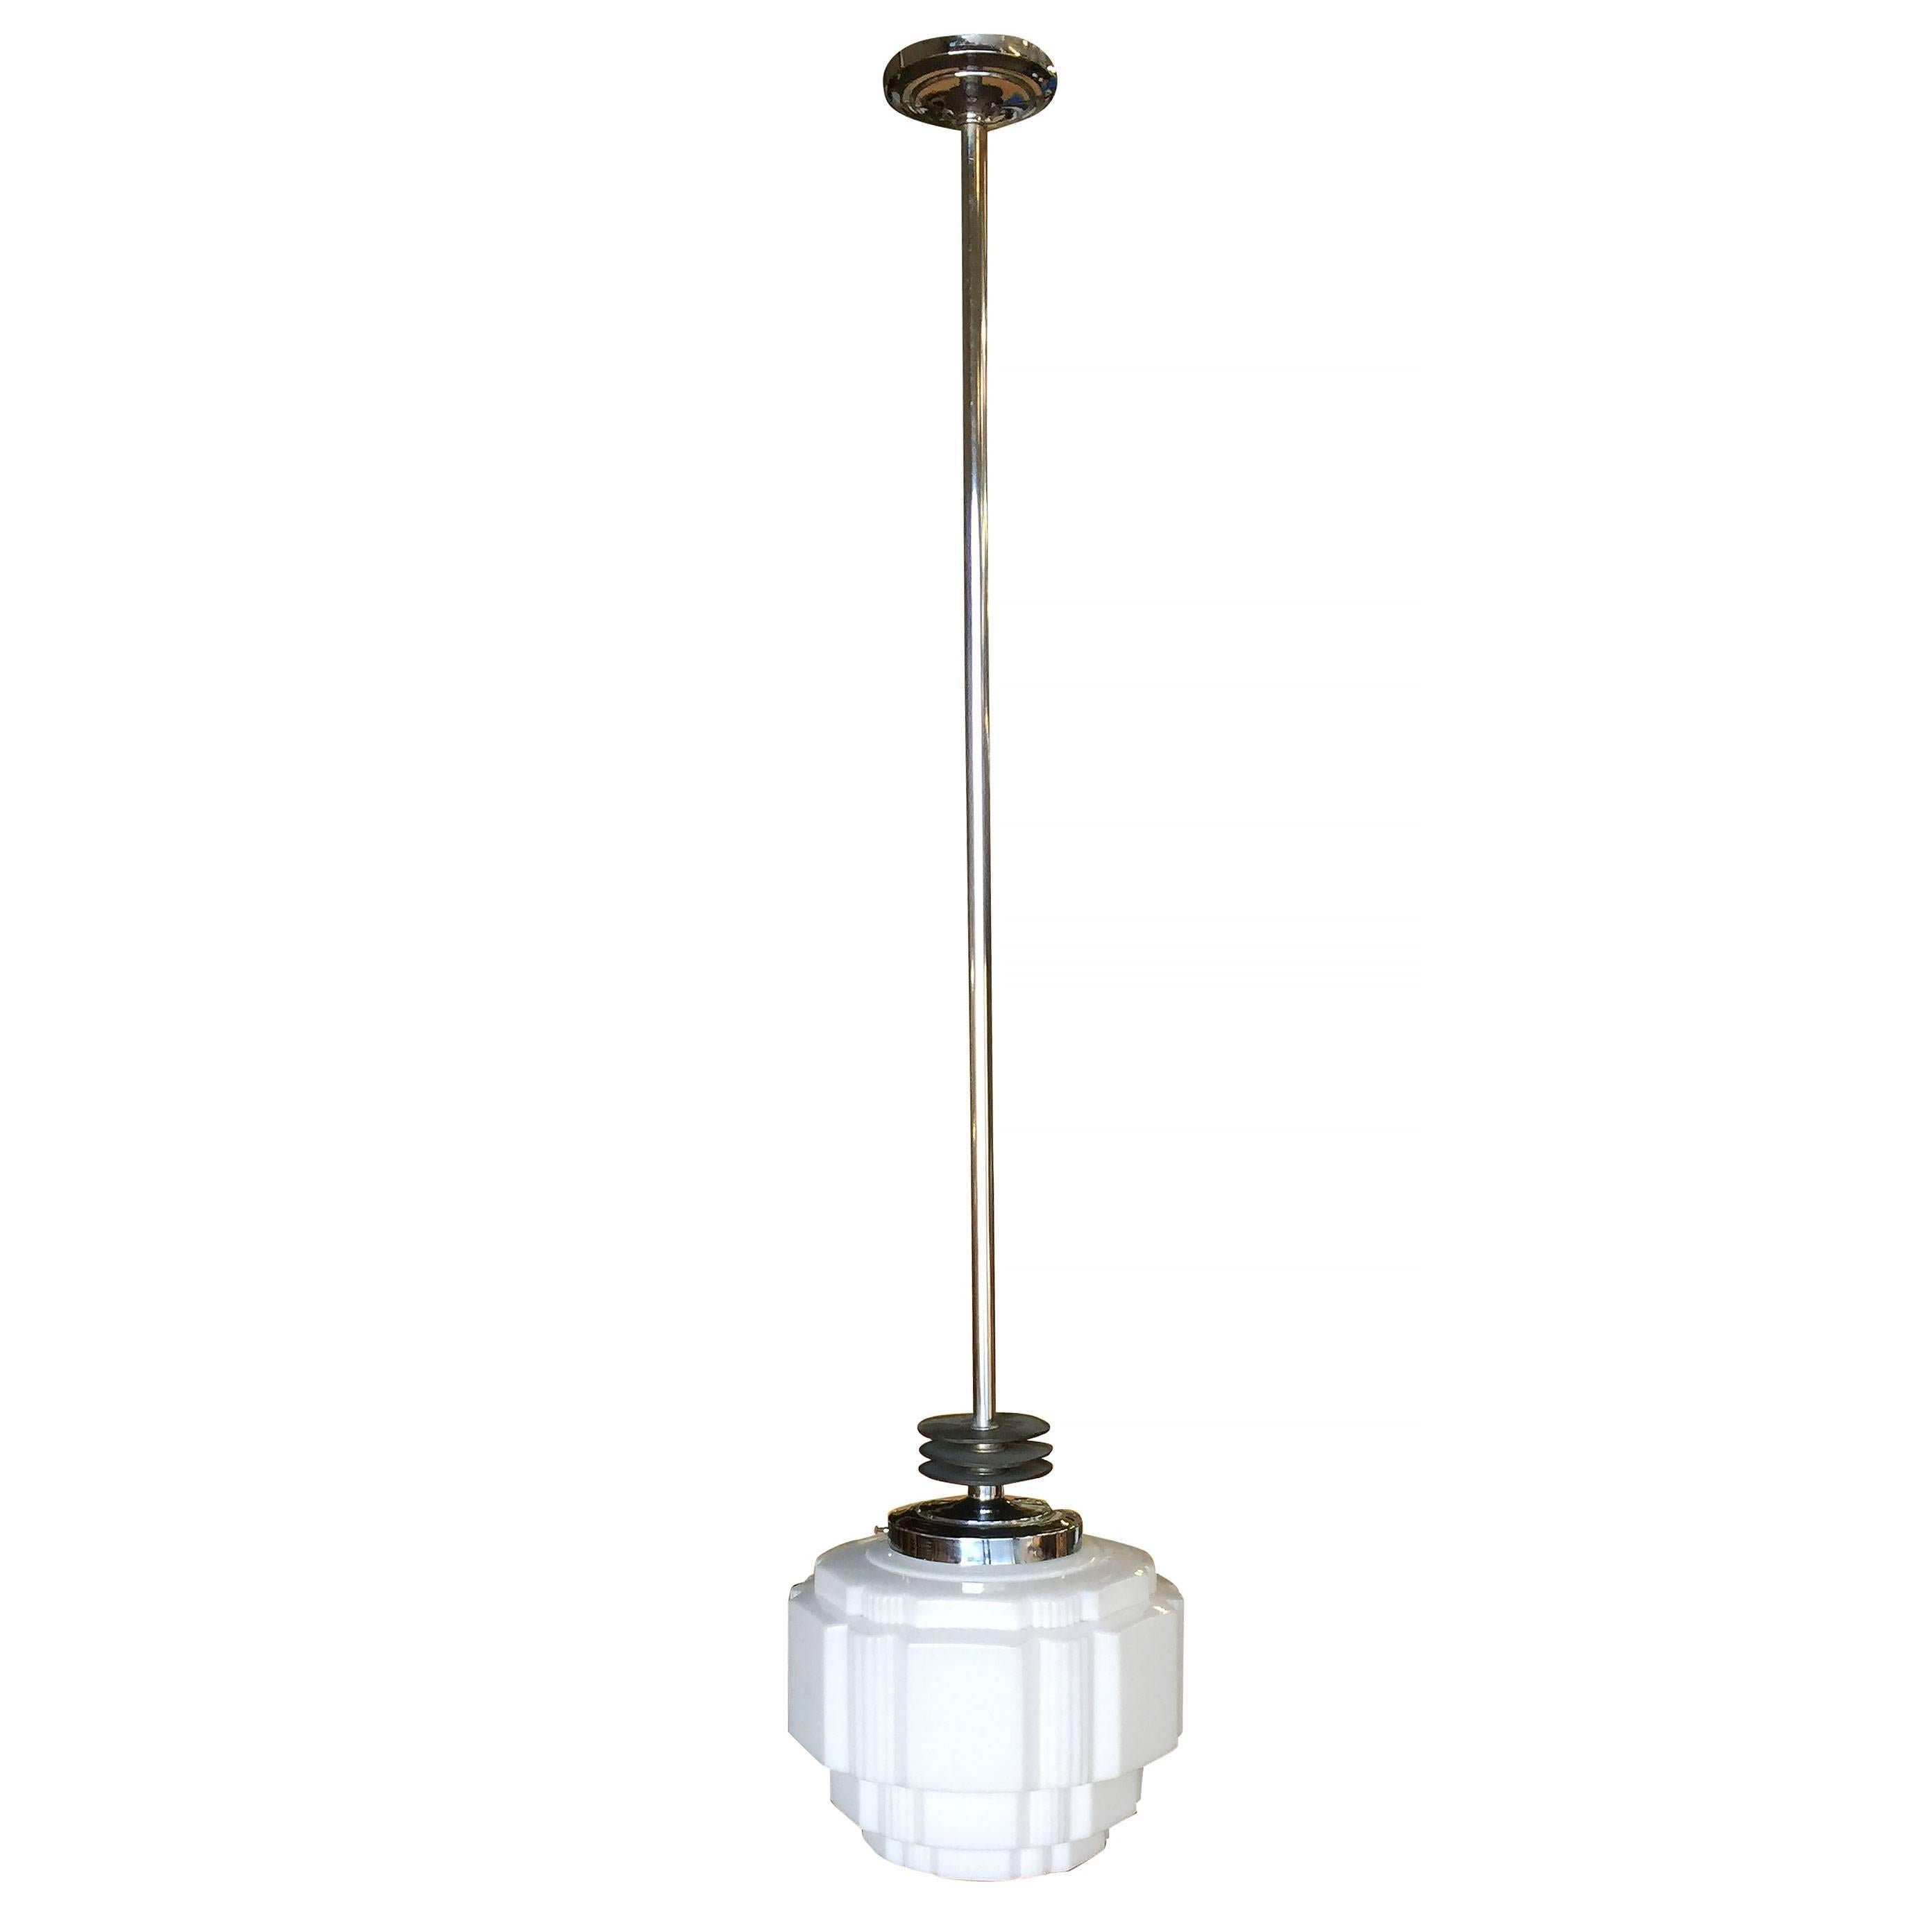 Rare Art Deco chrome ceiling pendant with enameled black streamline accents and stepped milk glass geometric school house style glass globe with hand-painted Art Deco design.

Dimensions of light are 16” high.

Drop can be 16